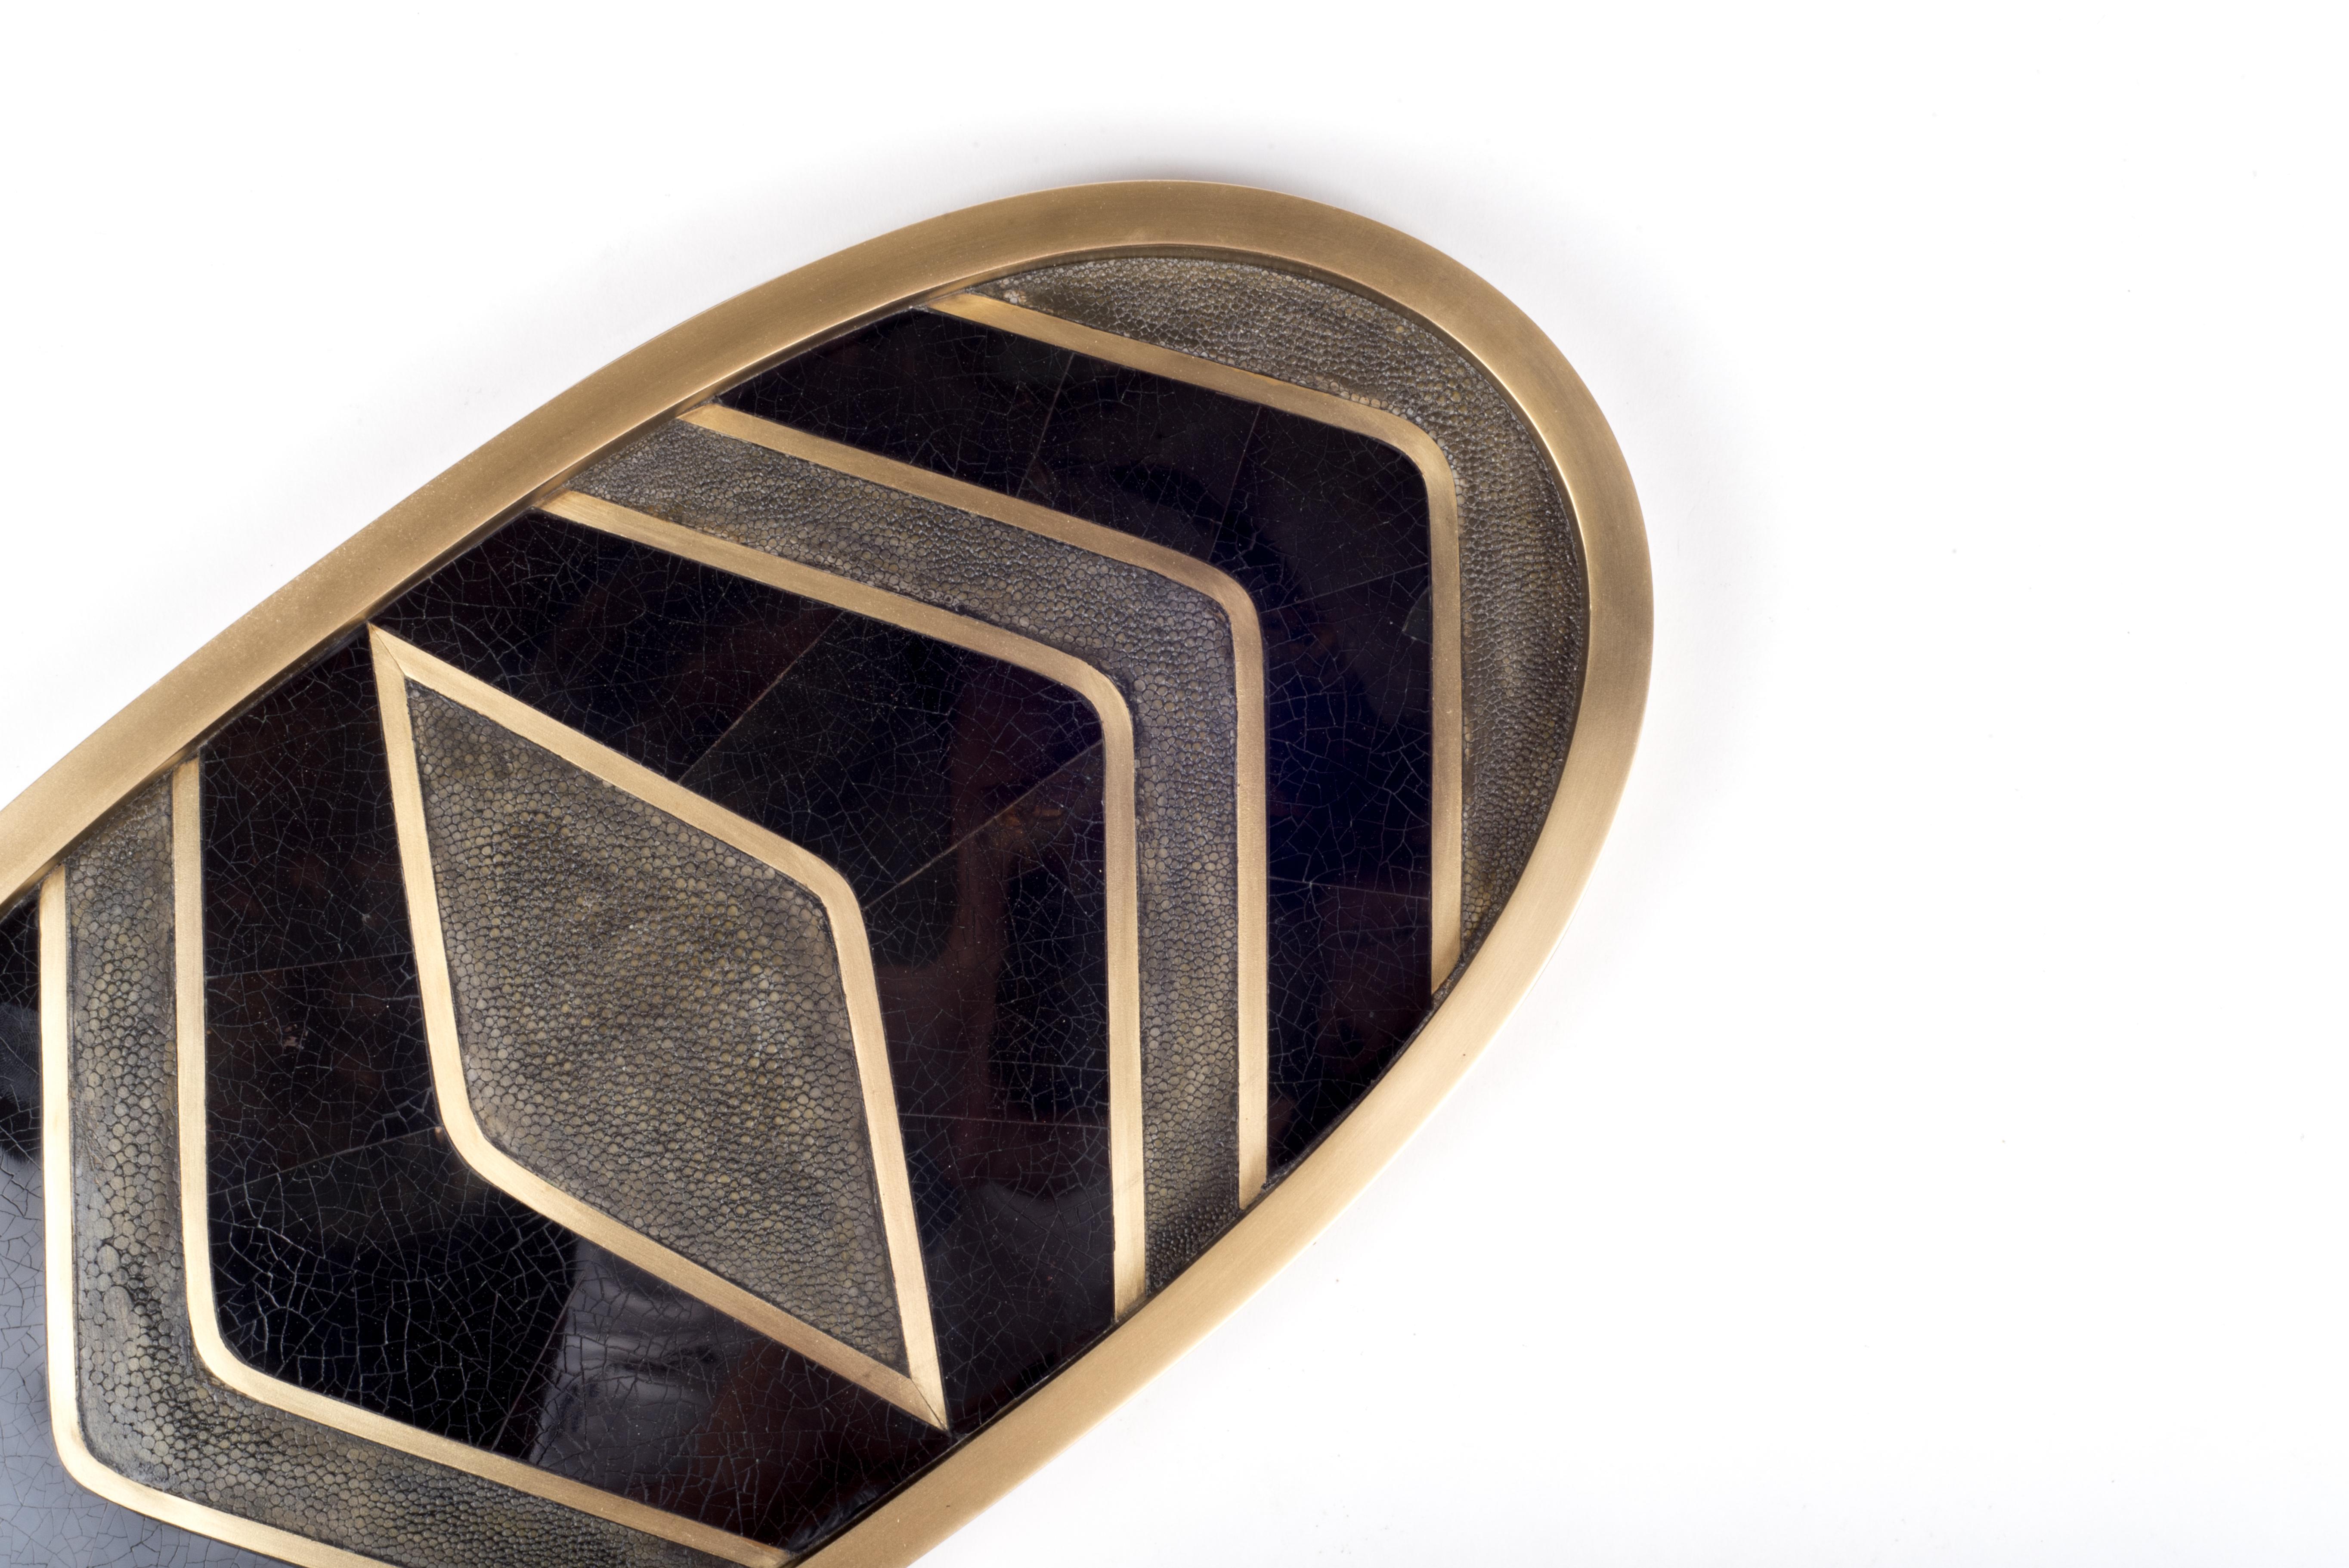 A classic oval vanity tray revisited; this Kifu Paris zig-zag pattern tray is inlaid in a mixture of coal black shagreen, black shell and bronze-patina brass, making for a stunning tabletop piece in any space. The frame is inlaid in bronze-patina